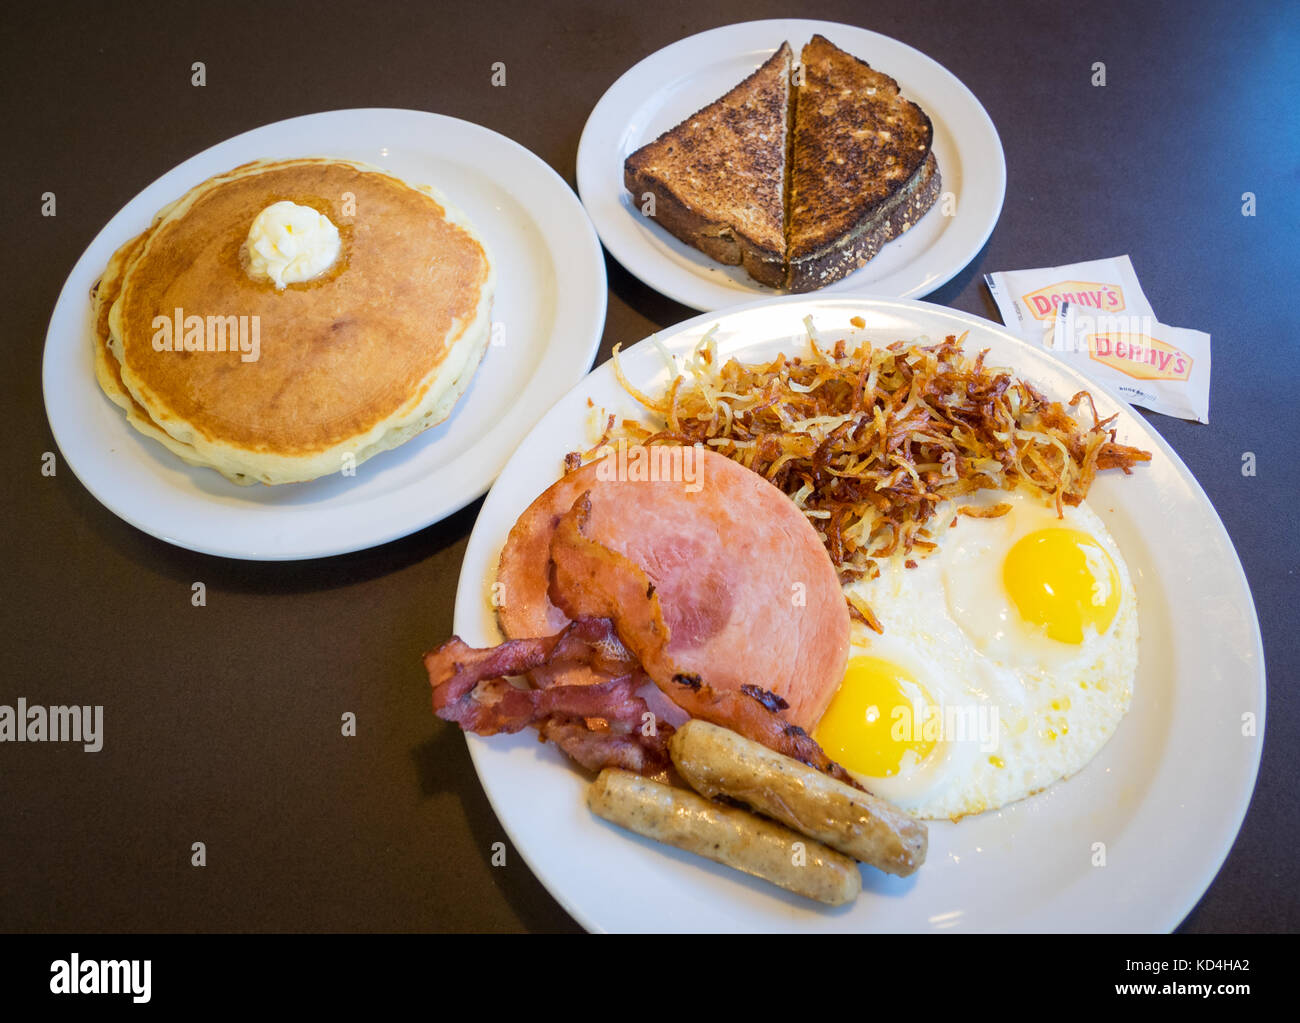 A Grand Slam breakfast from Denny's (Denny's Diner), a well-known pancake house and fast casual restaurant chain. Stock Photo